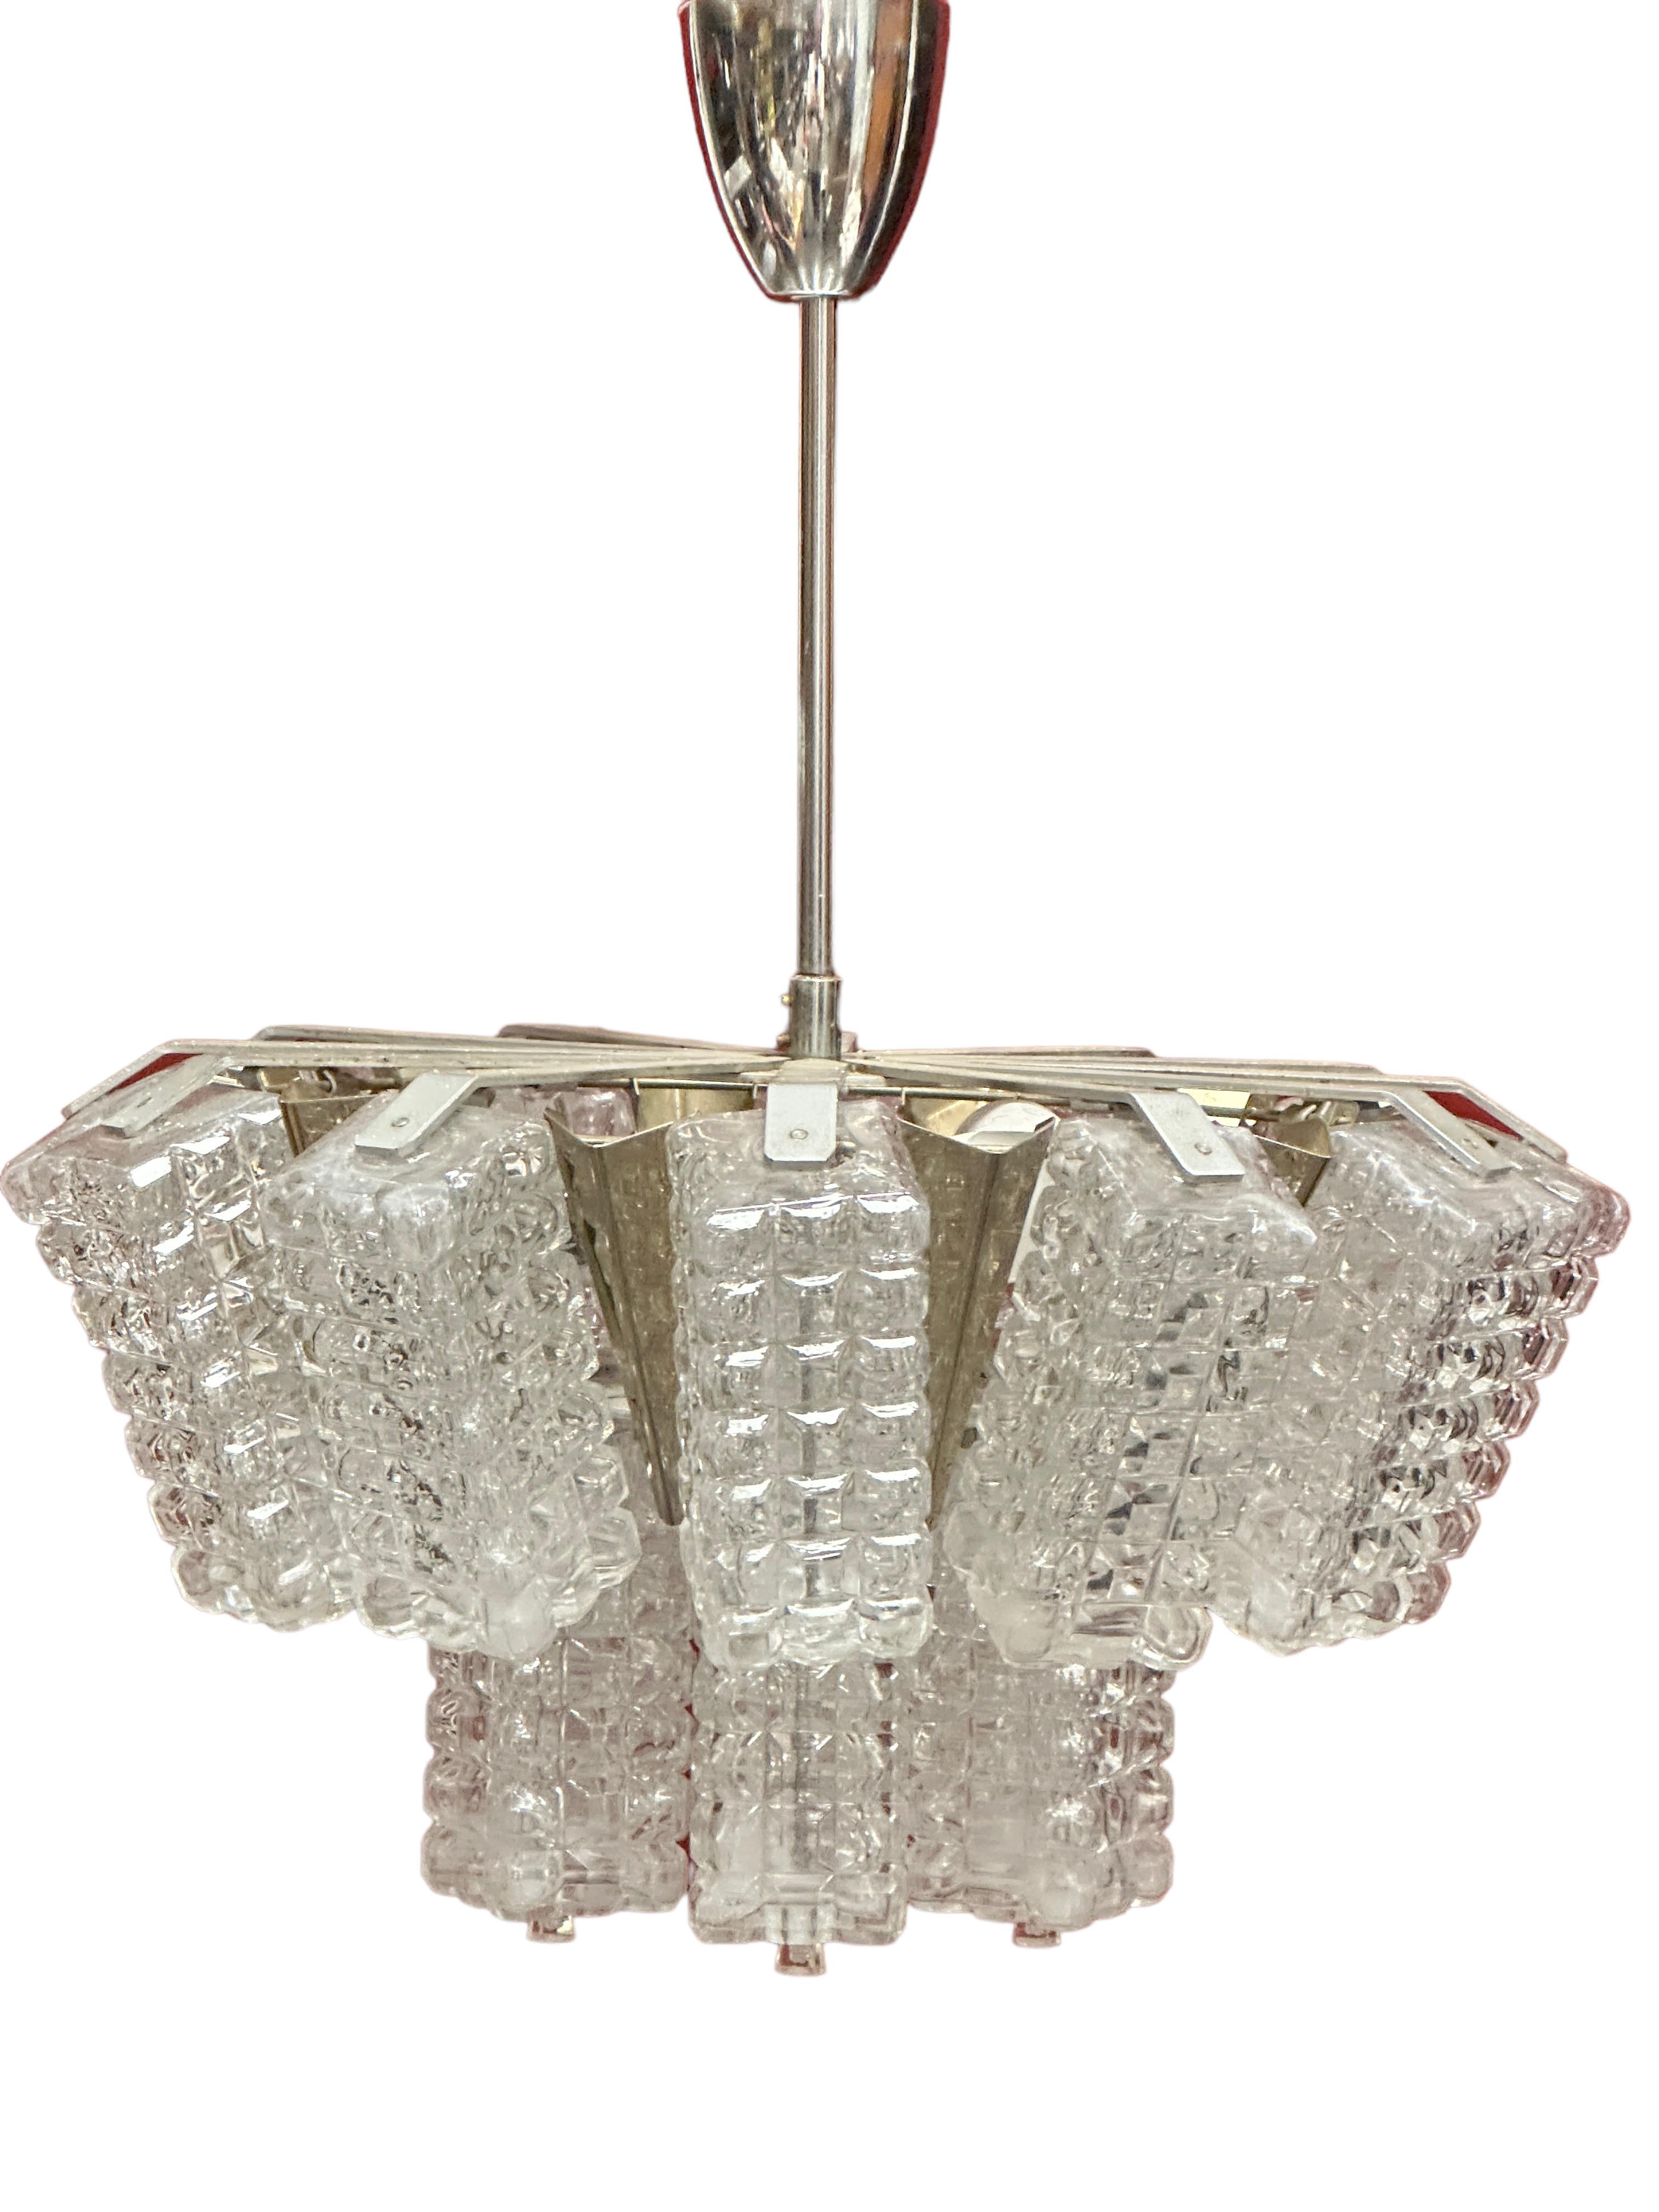 Mid-20th Century Pair of Two Tiered Glass Cube Chandelier by Austrolux, Austria, 1960s For Sale